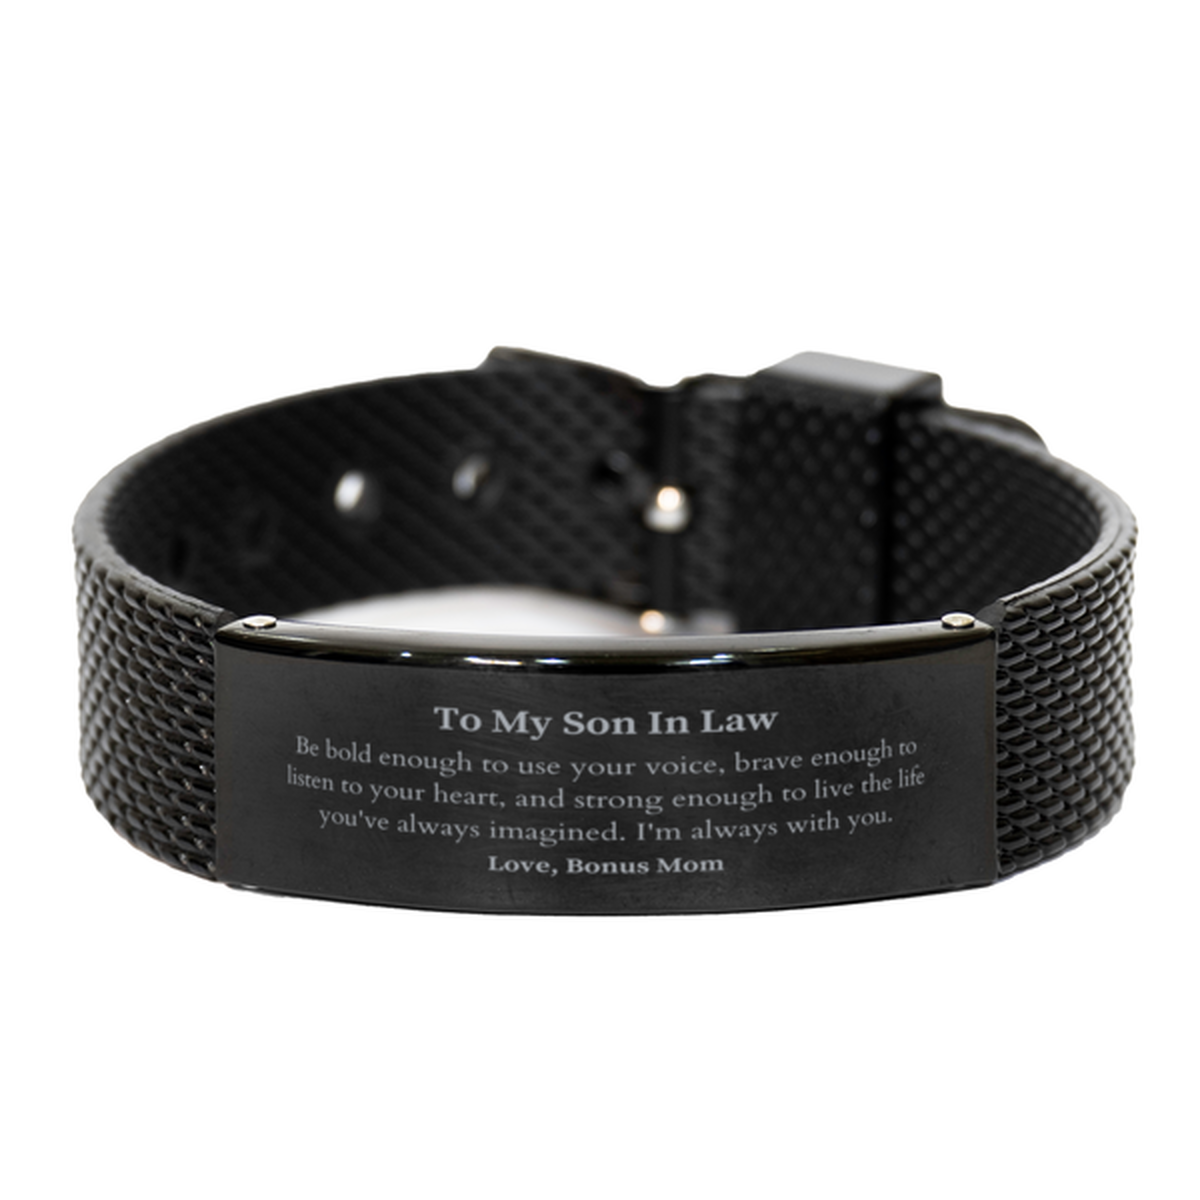 Keepsake Son In Law Black Shark Mesh Bracelet Gift Idea Graduation Christmas Birthday Son In Law from Bonus Mom, Son In Law Be bold enough to use your voice, brave enough to listen to your heart. Love, Bonus Mom